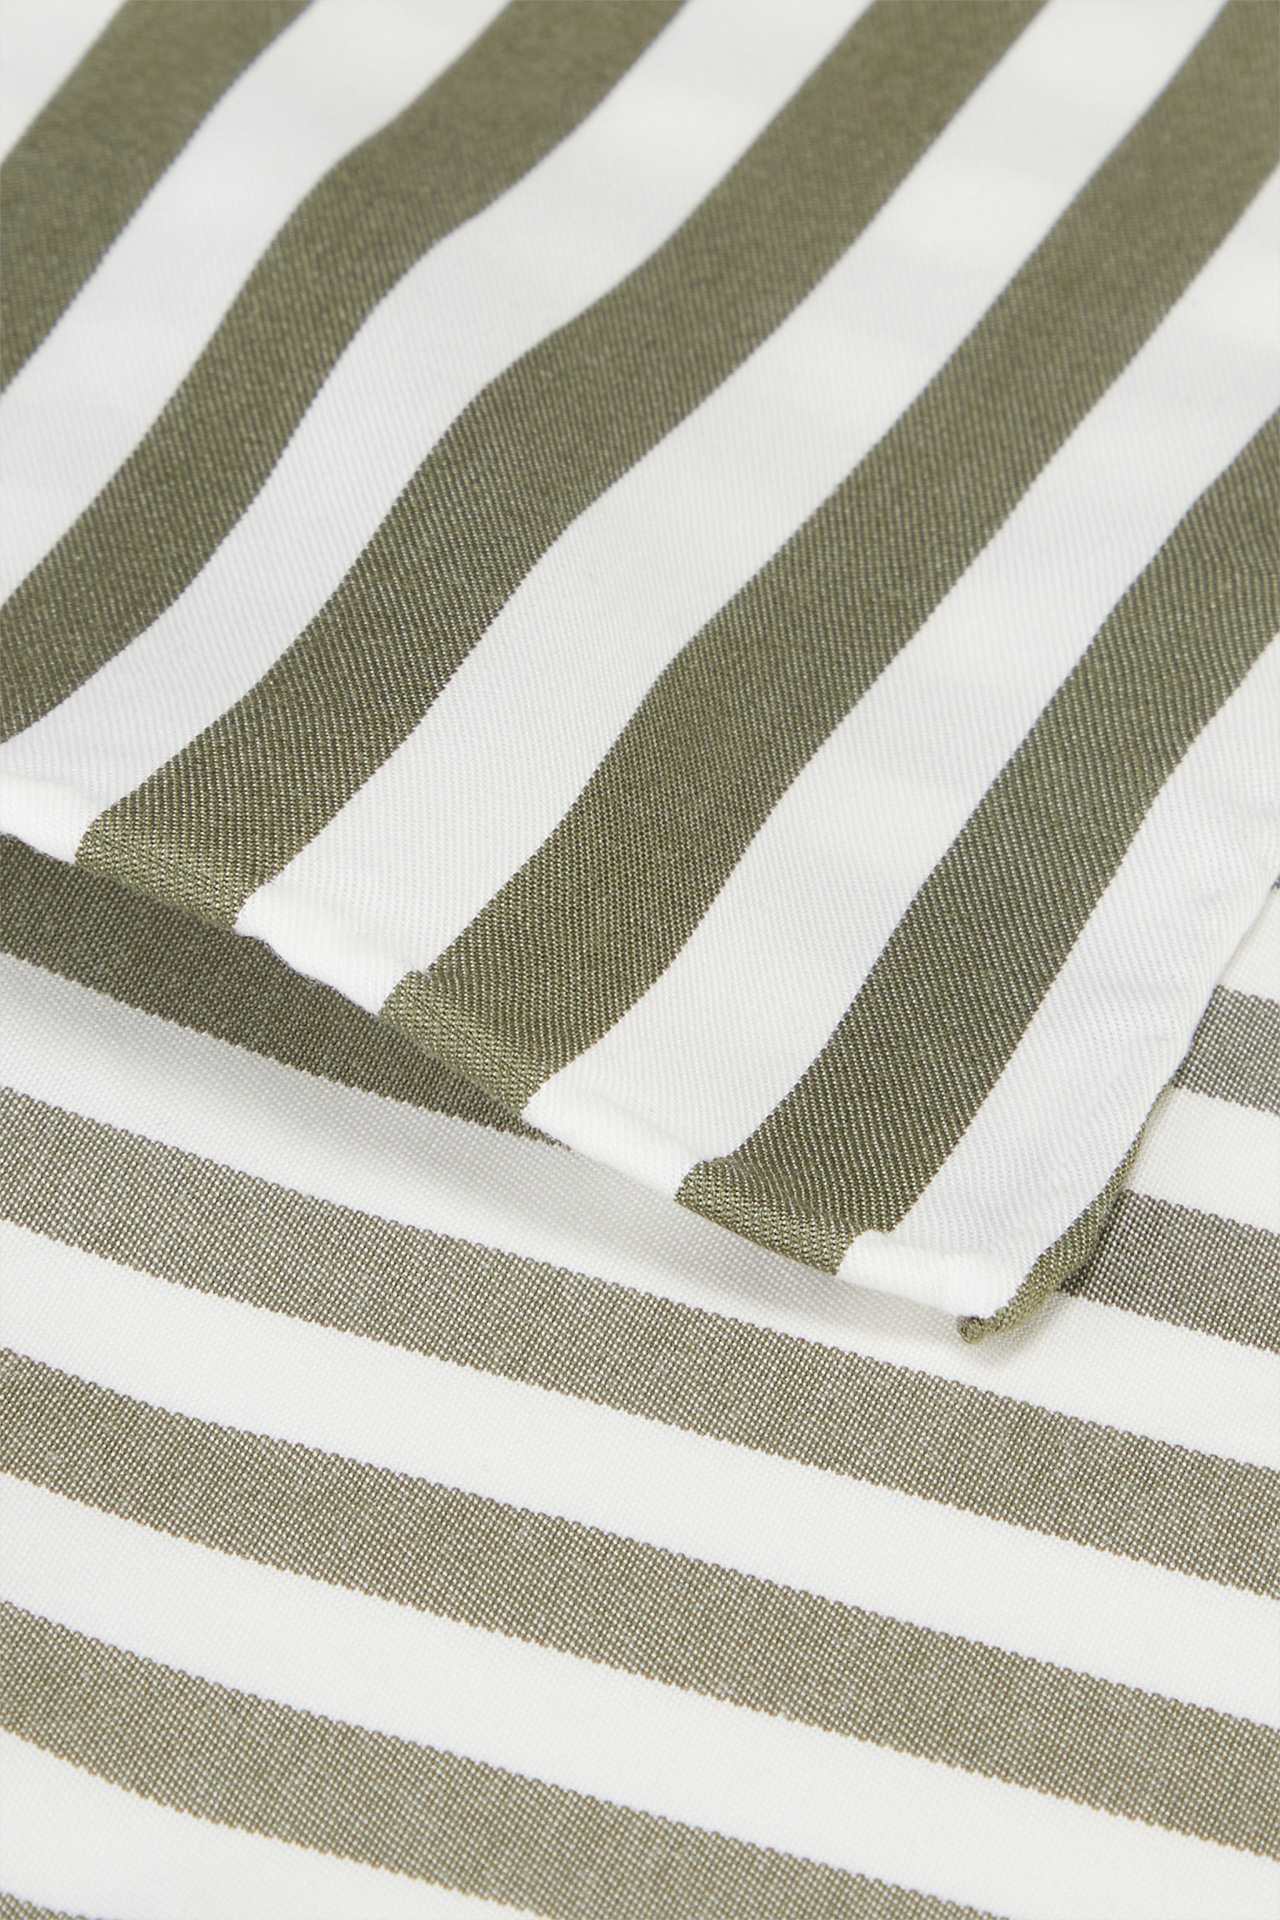 Handkerchief in Olive and White Striped